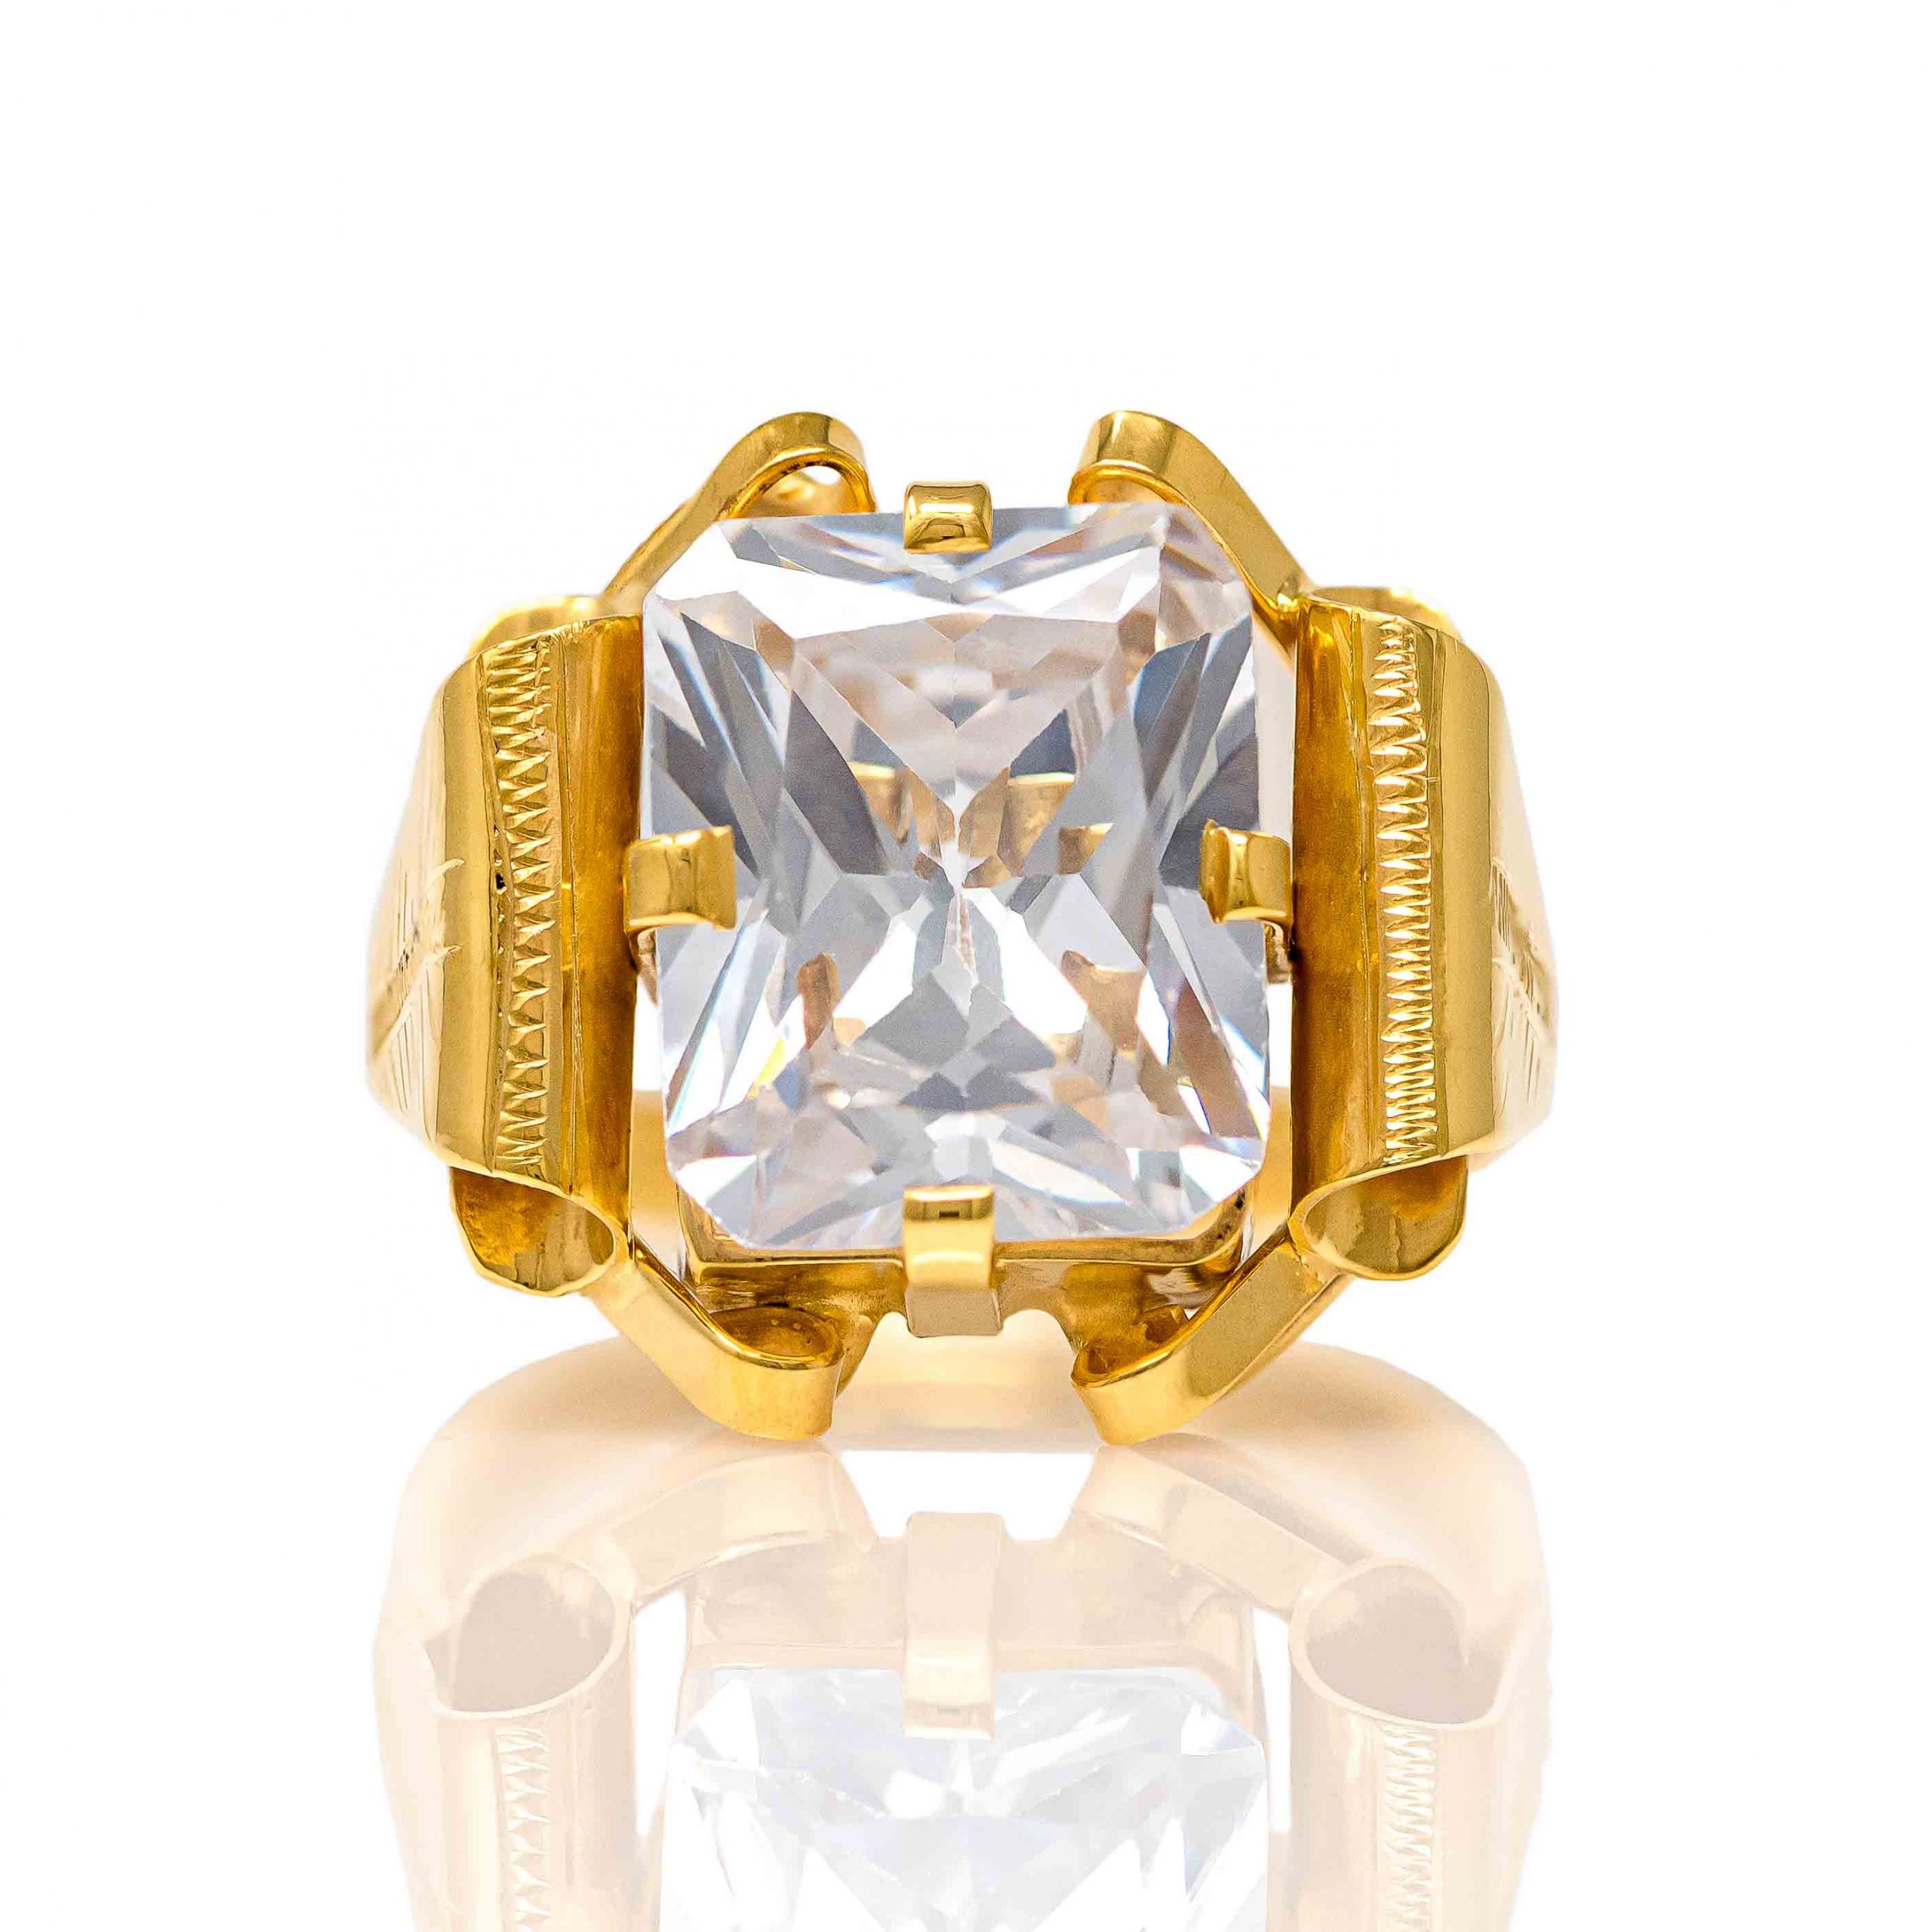 Handmade Yellow Gold 9kt Ring with Cubic Zirconia